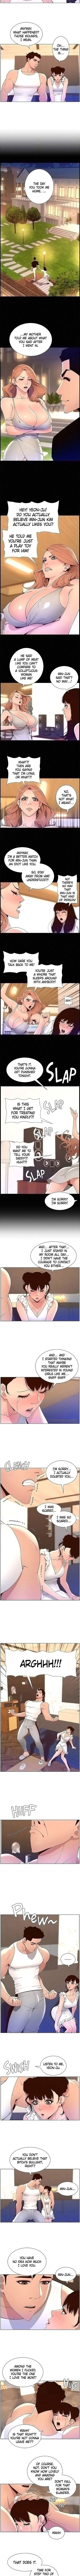 app-for-the-emperor-of-the-night-chap-40-2